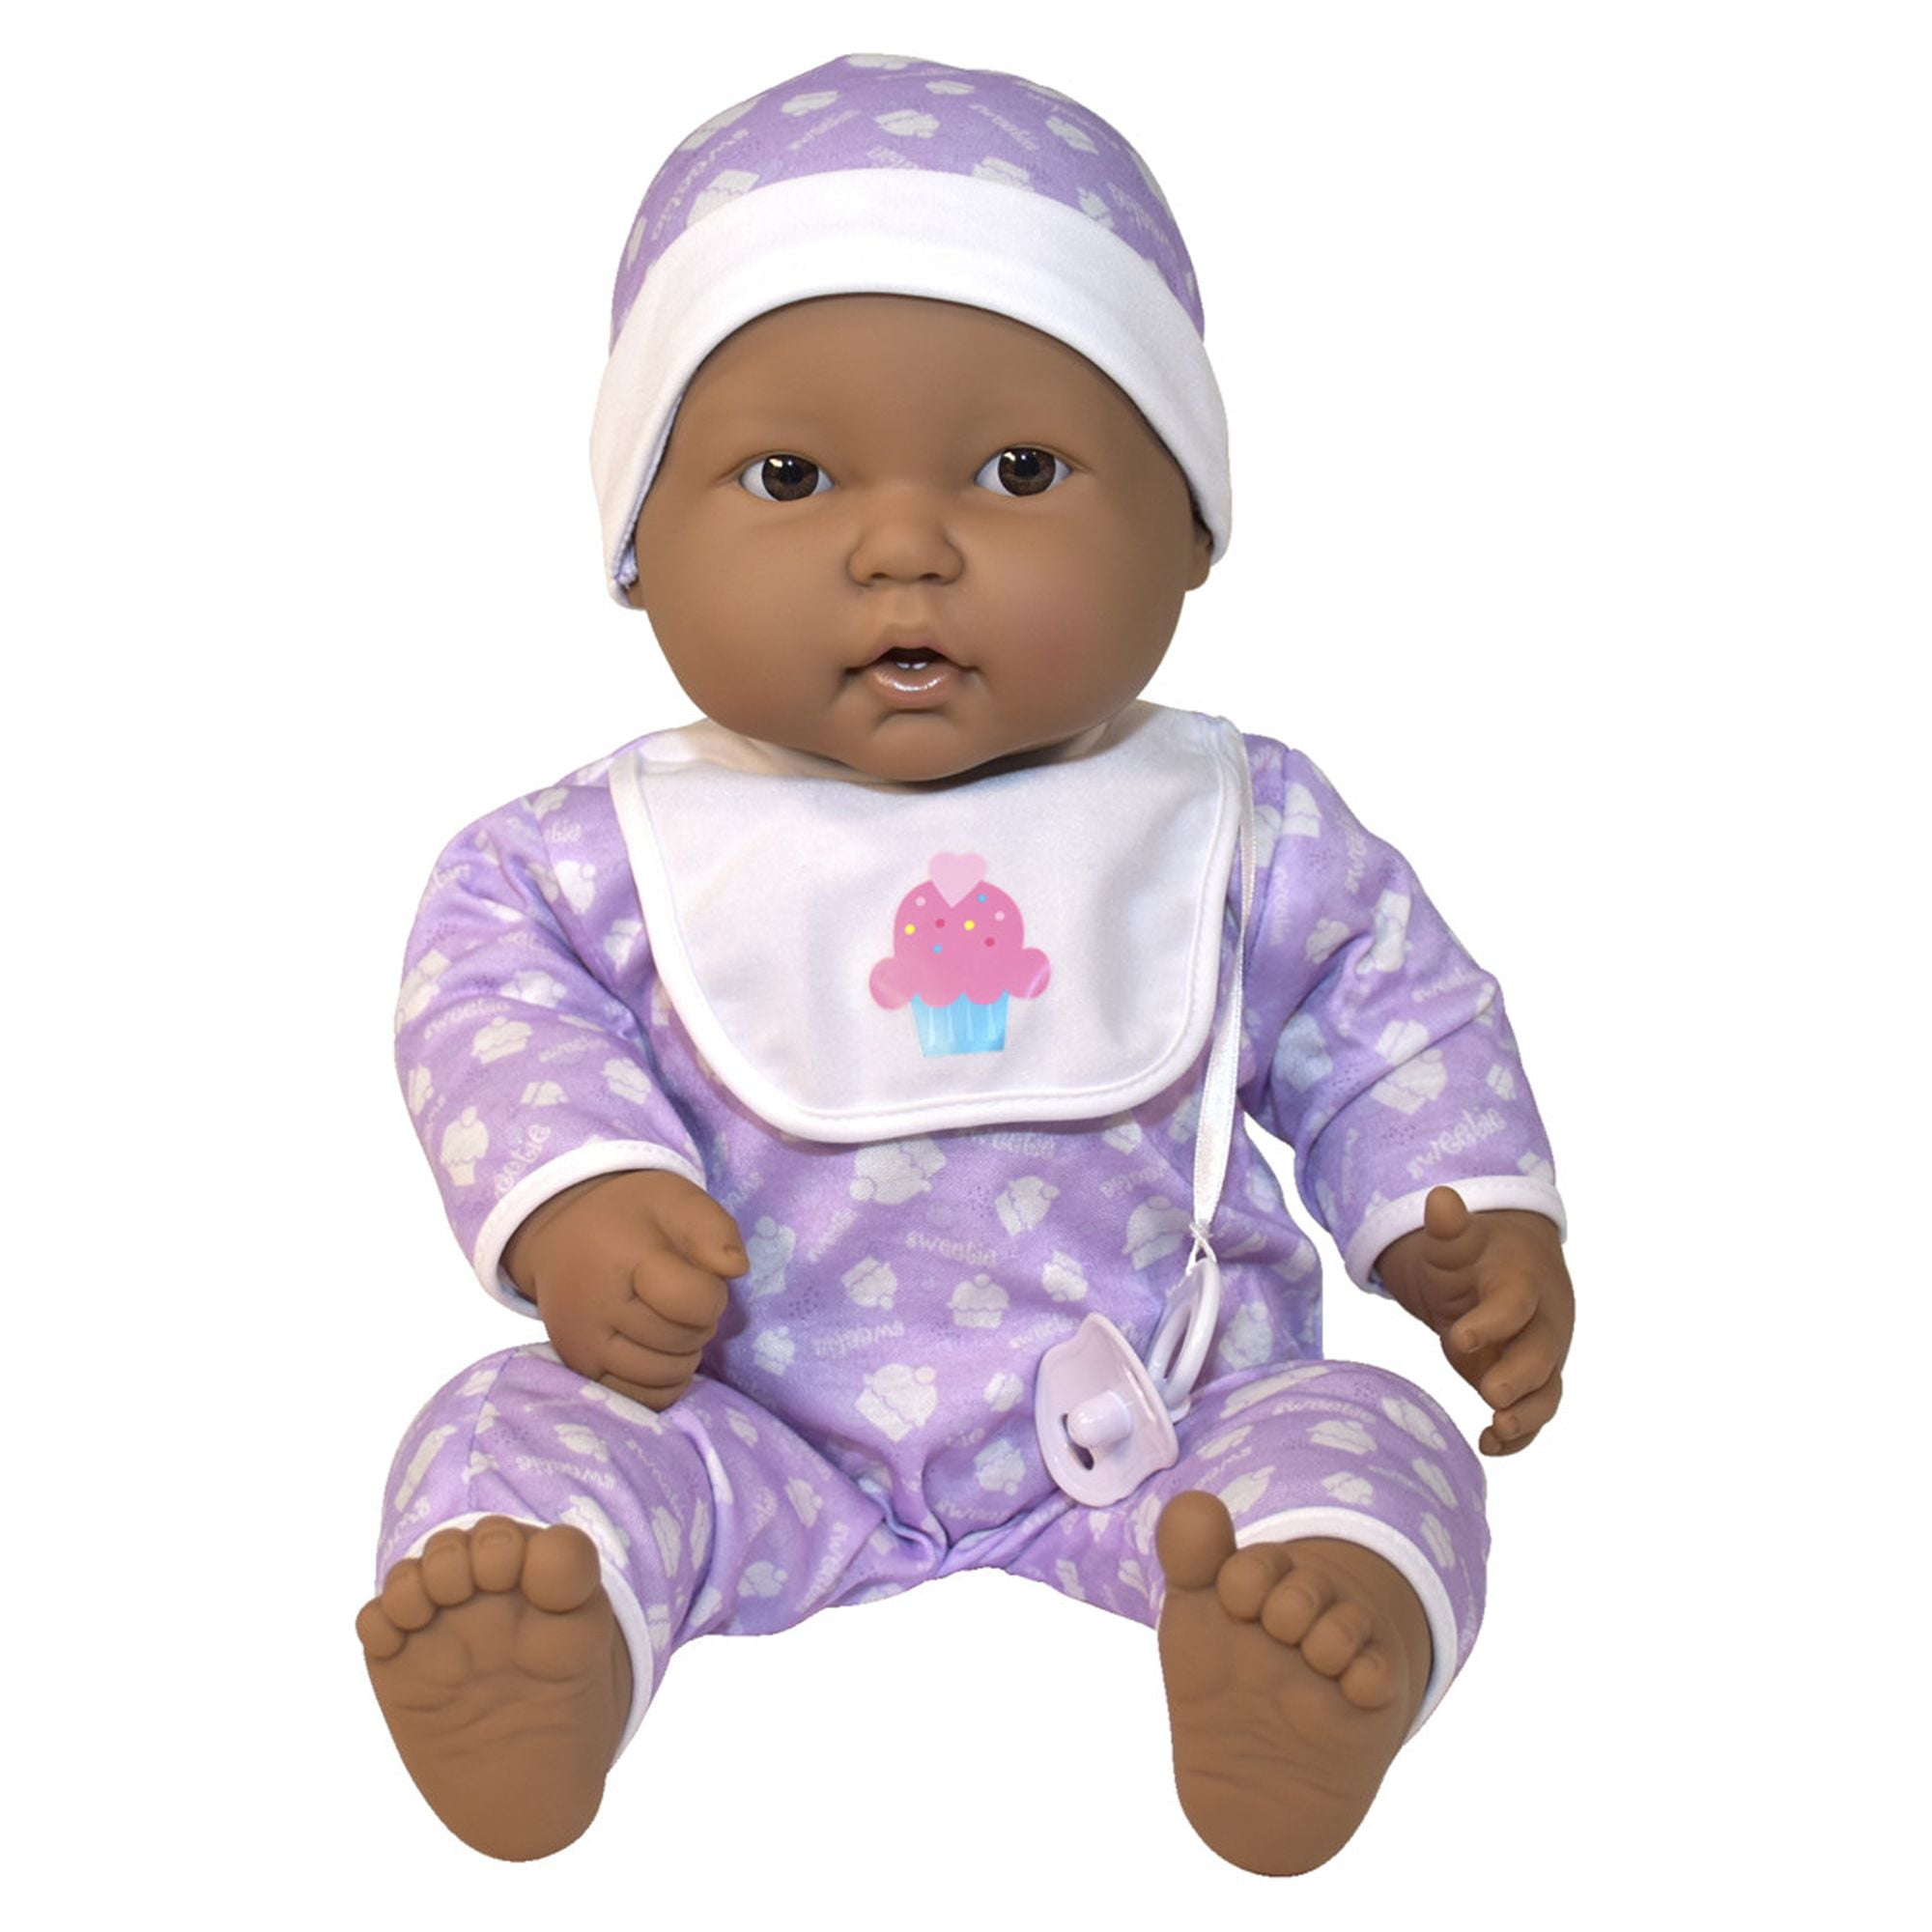 Abilitations Weighted Doll, Hispanic Ethnicity, 4 Pounds - Walmart.com